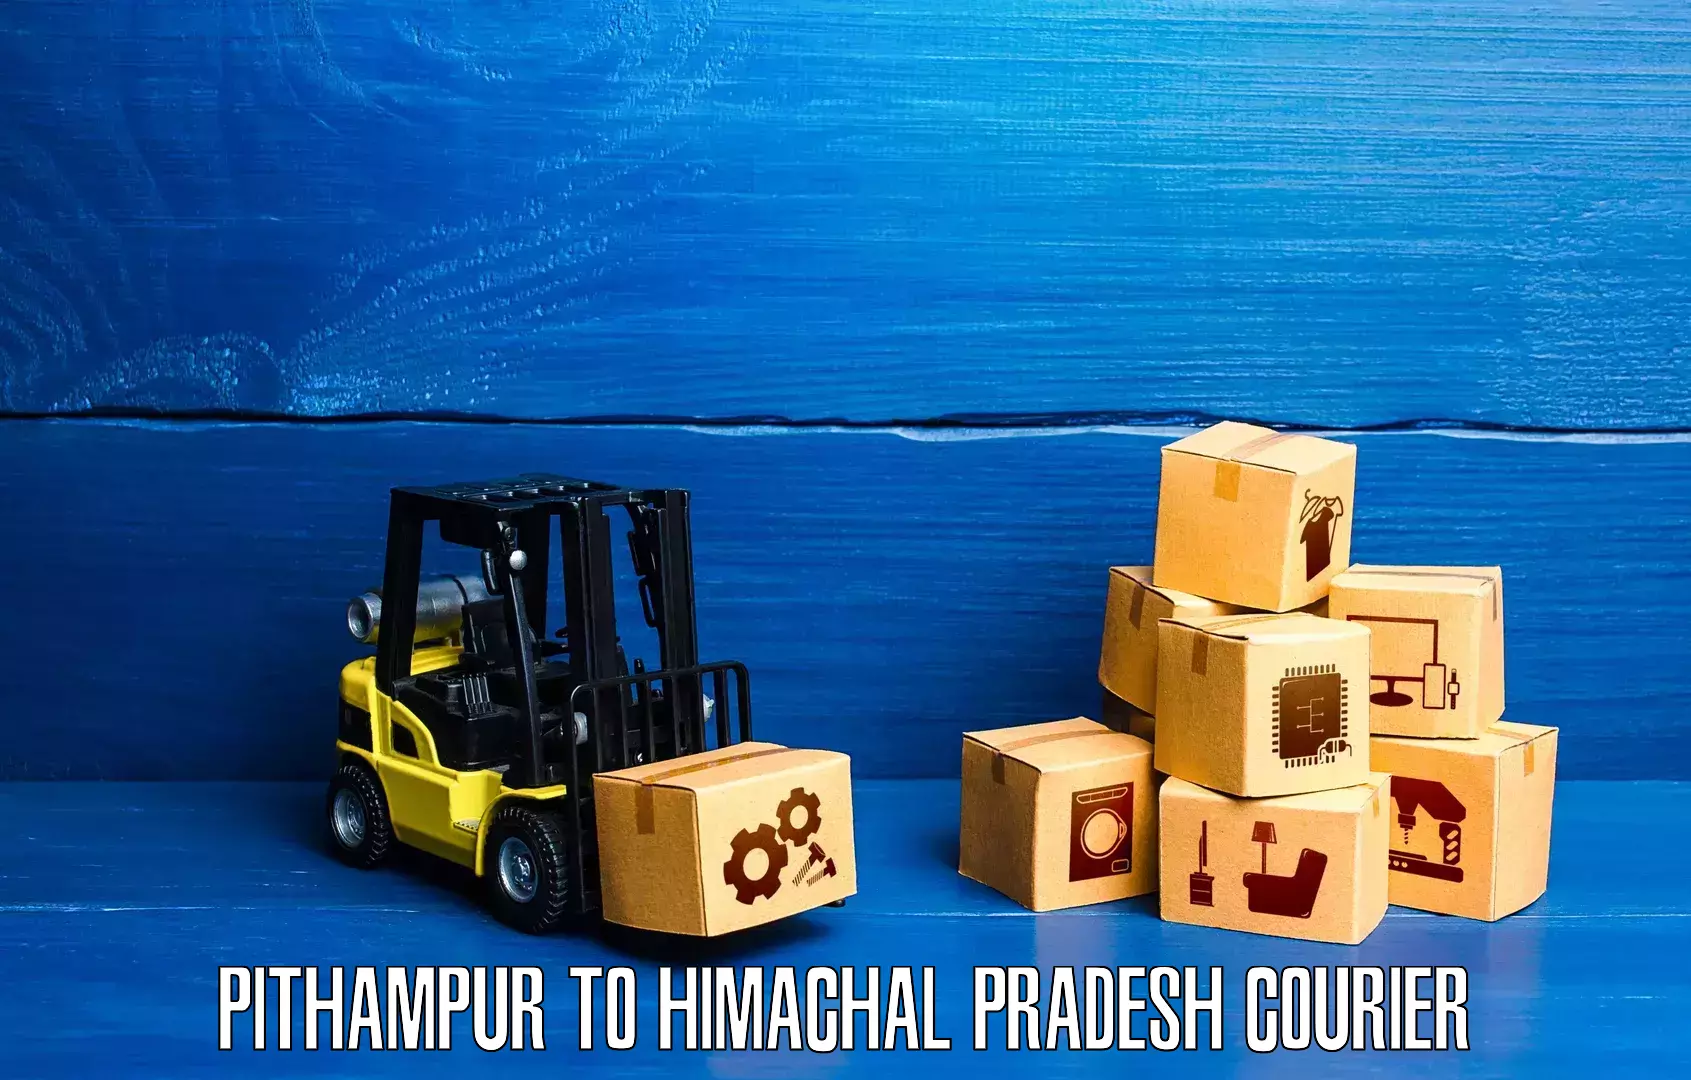 Professional courier handling Pithampur to Dheera